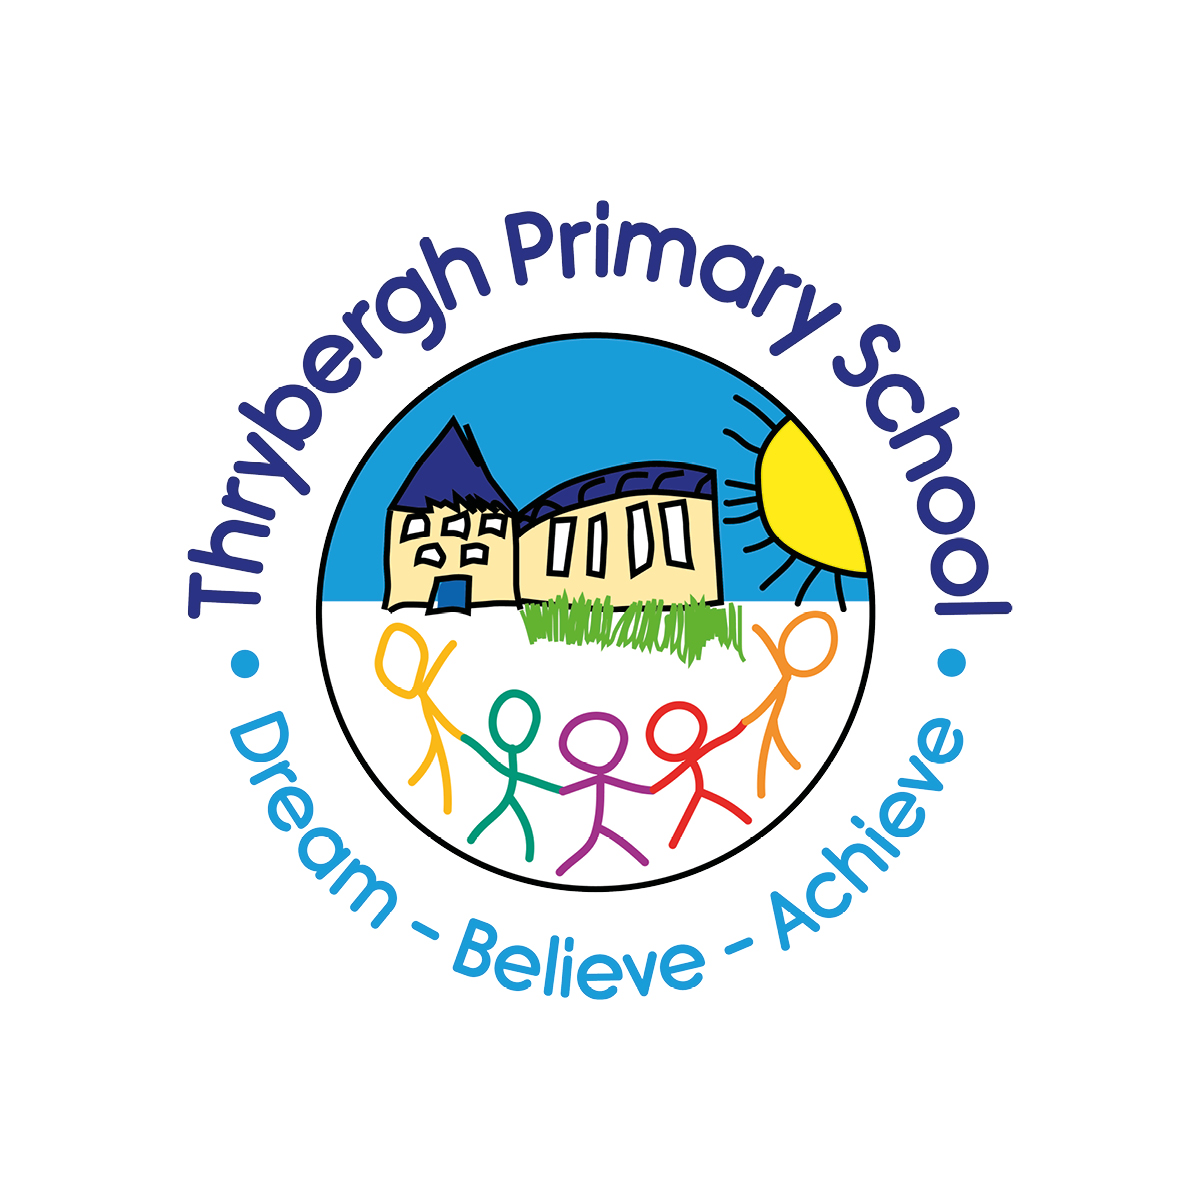 Thrybergh Primary